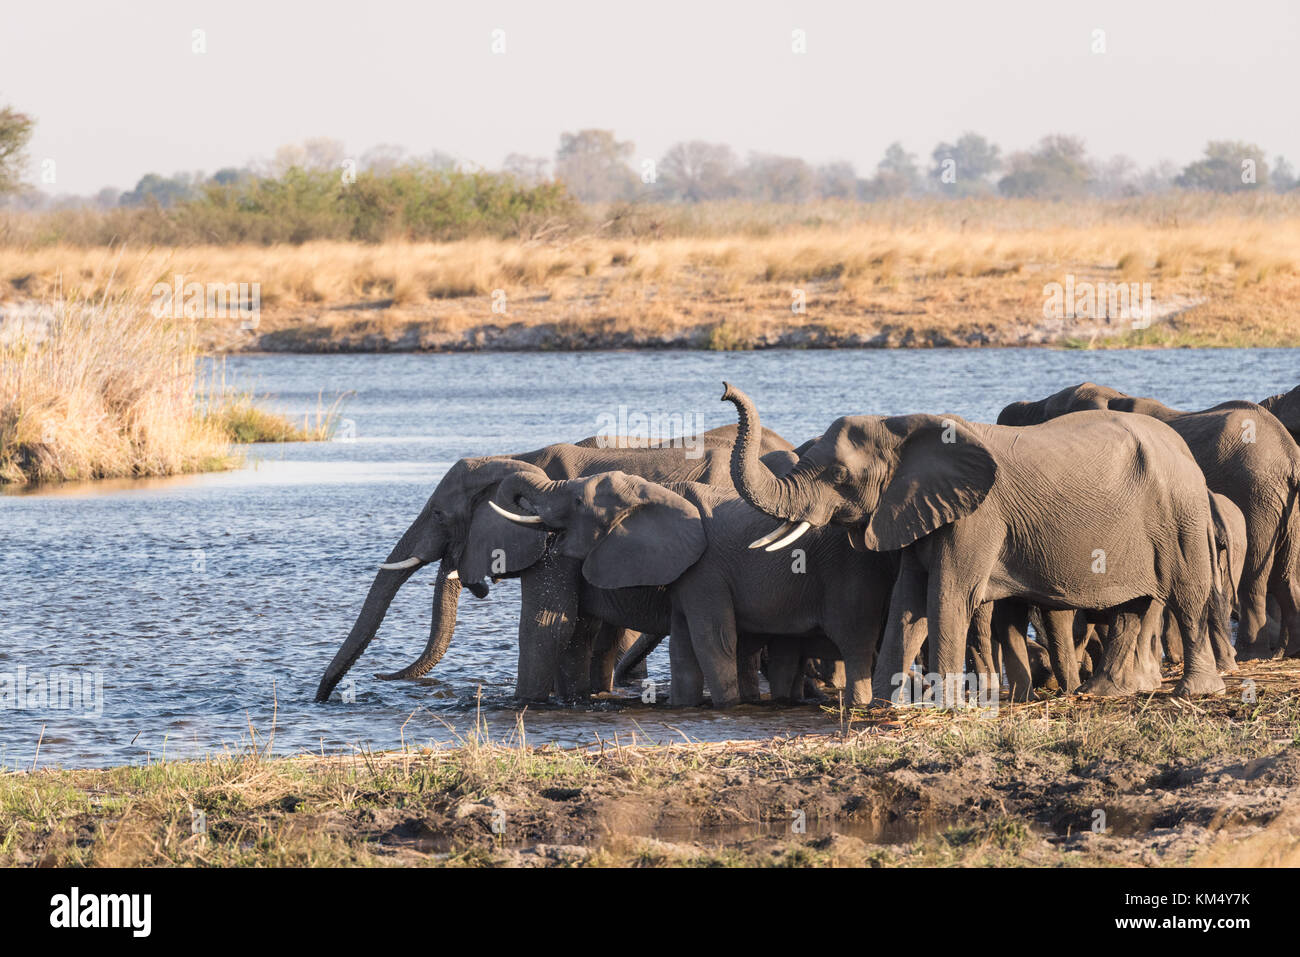 Large adult elephant (Loxodonta) stands guard in front of other elephants drinking in river Bwabwata National Park, Namibia Stock Photo